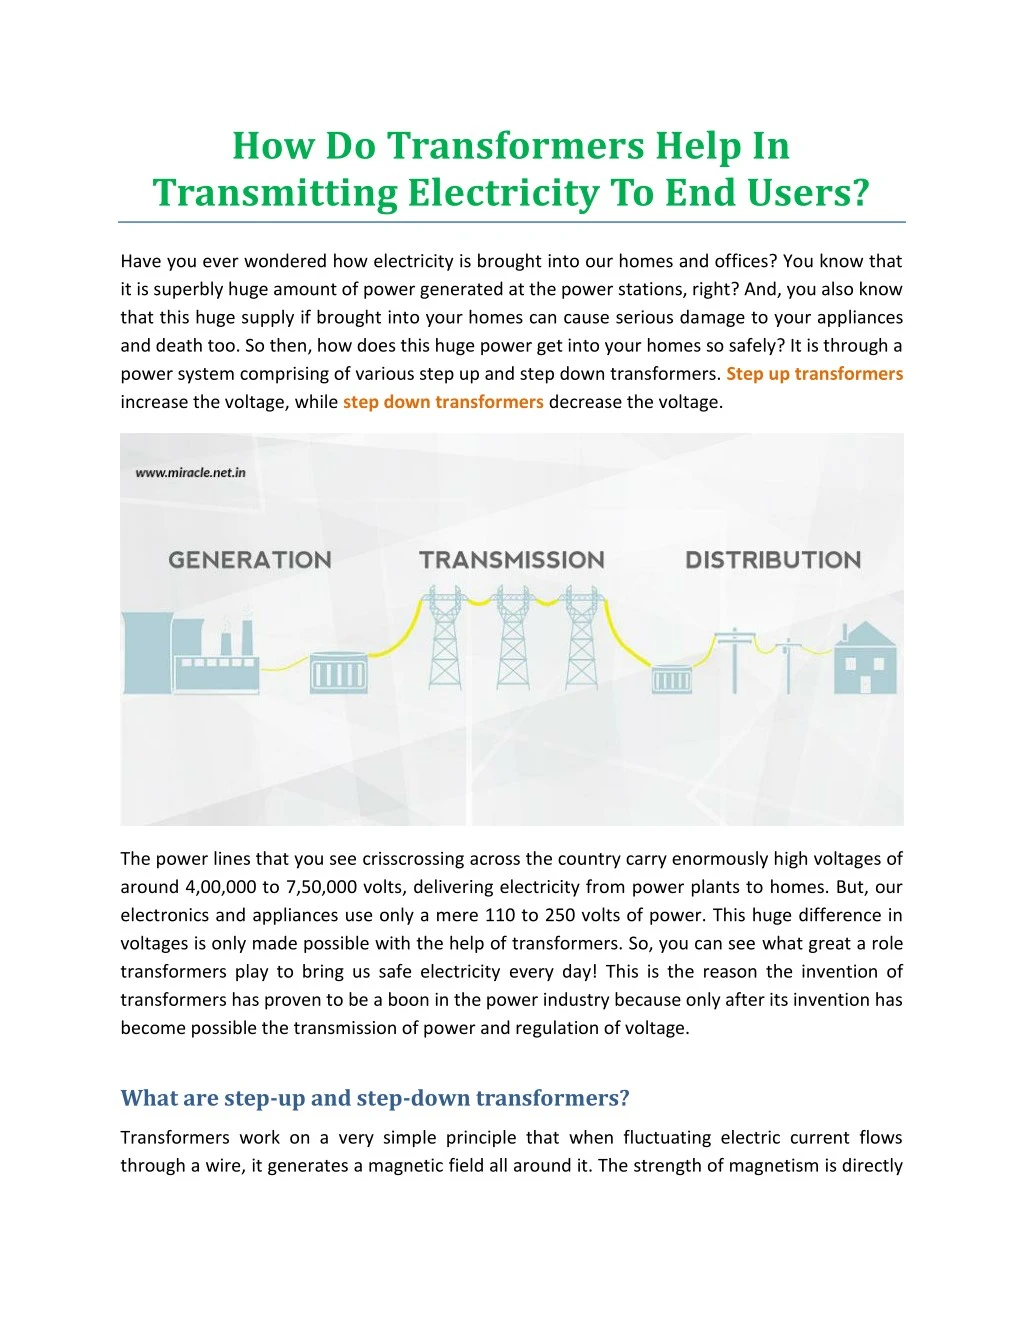 how do transformers help in transmitting